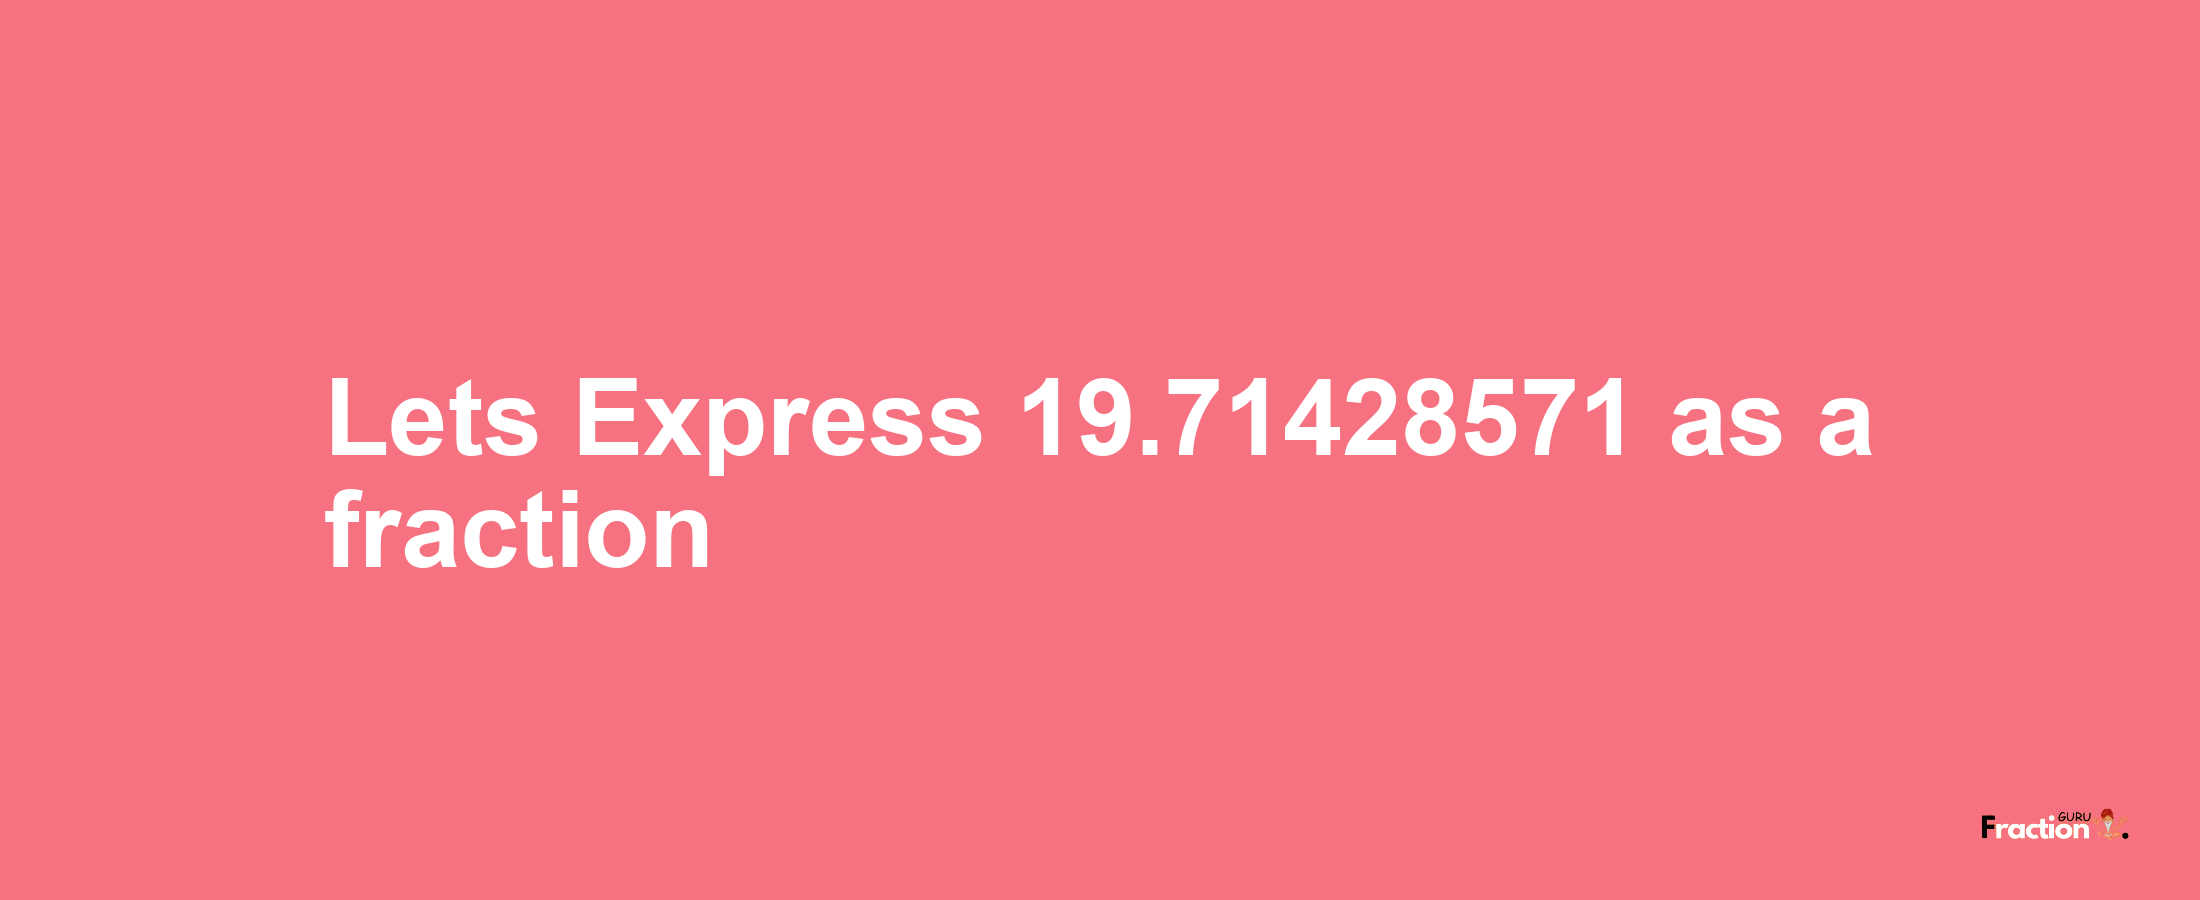 Lets Express 19.71428571 as afraction